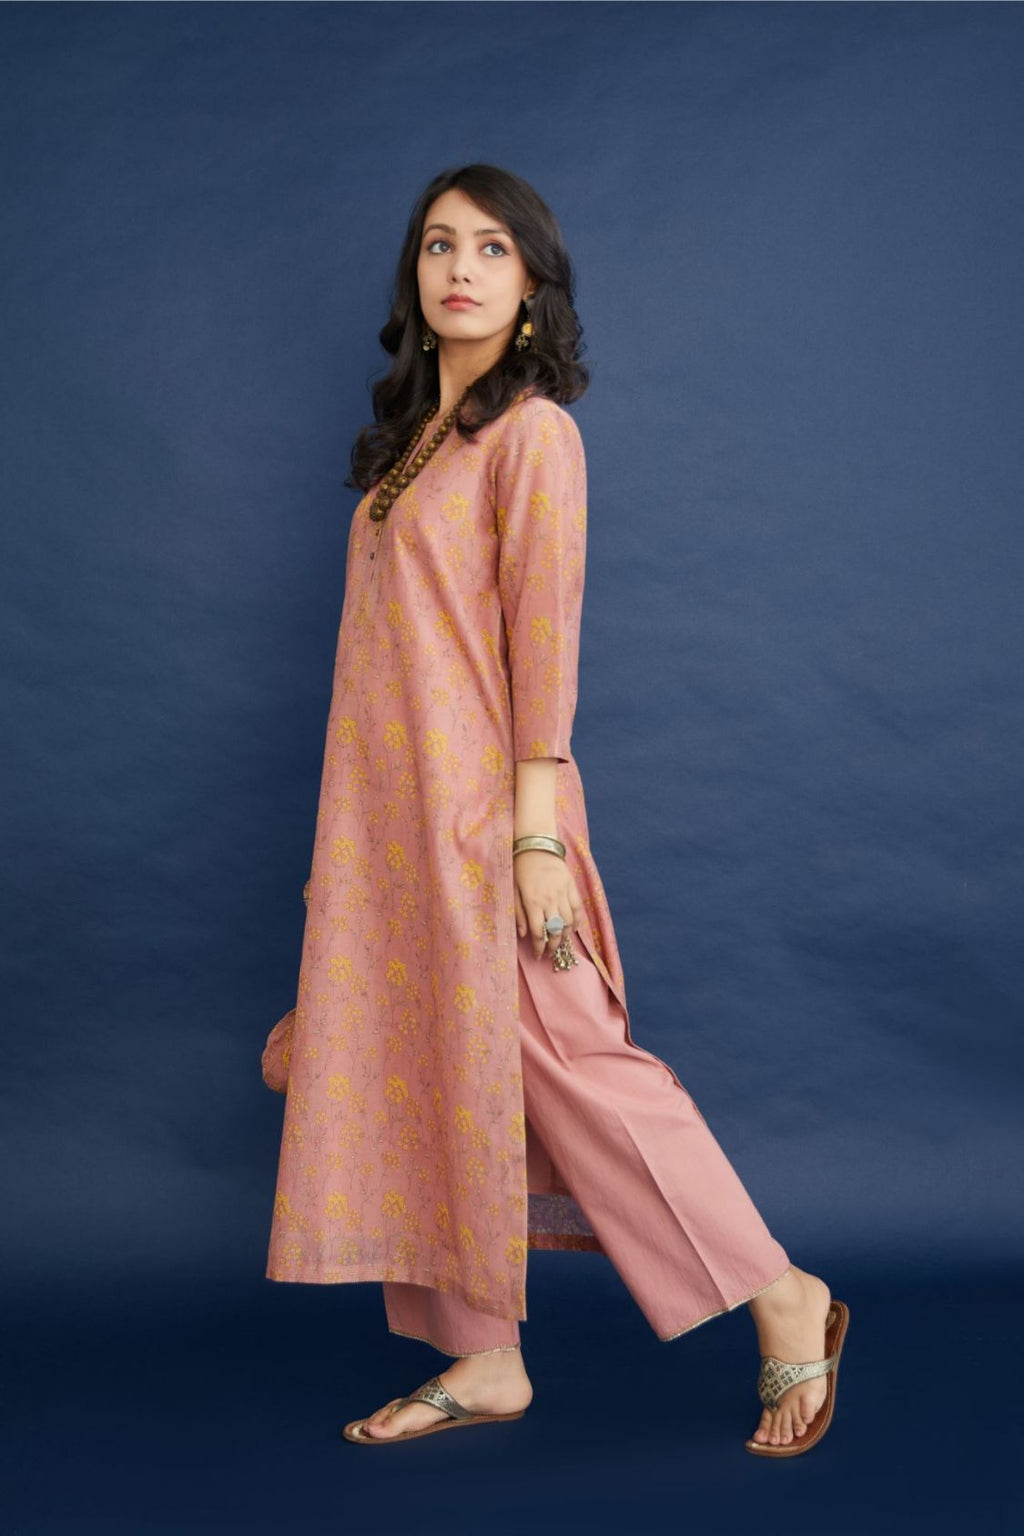 Dusty rose & yellow hand block printed straight kurta set, highlighted with dull gold quilting.